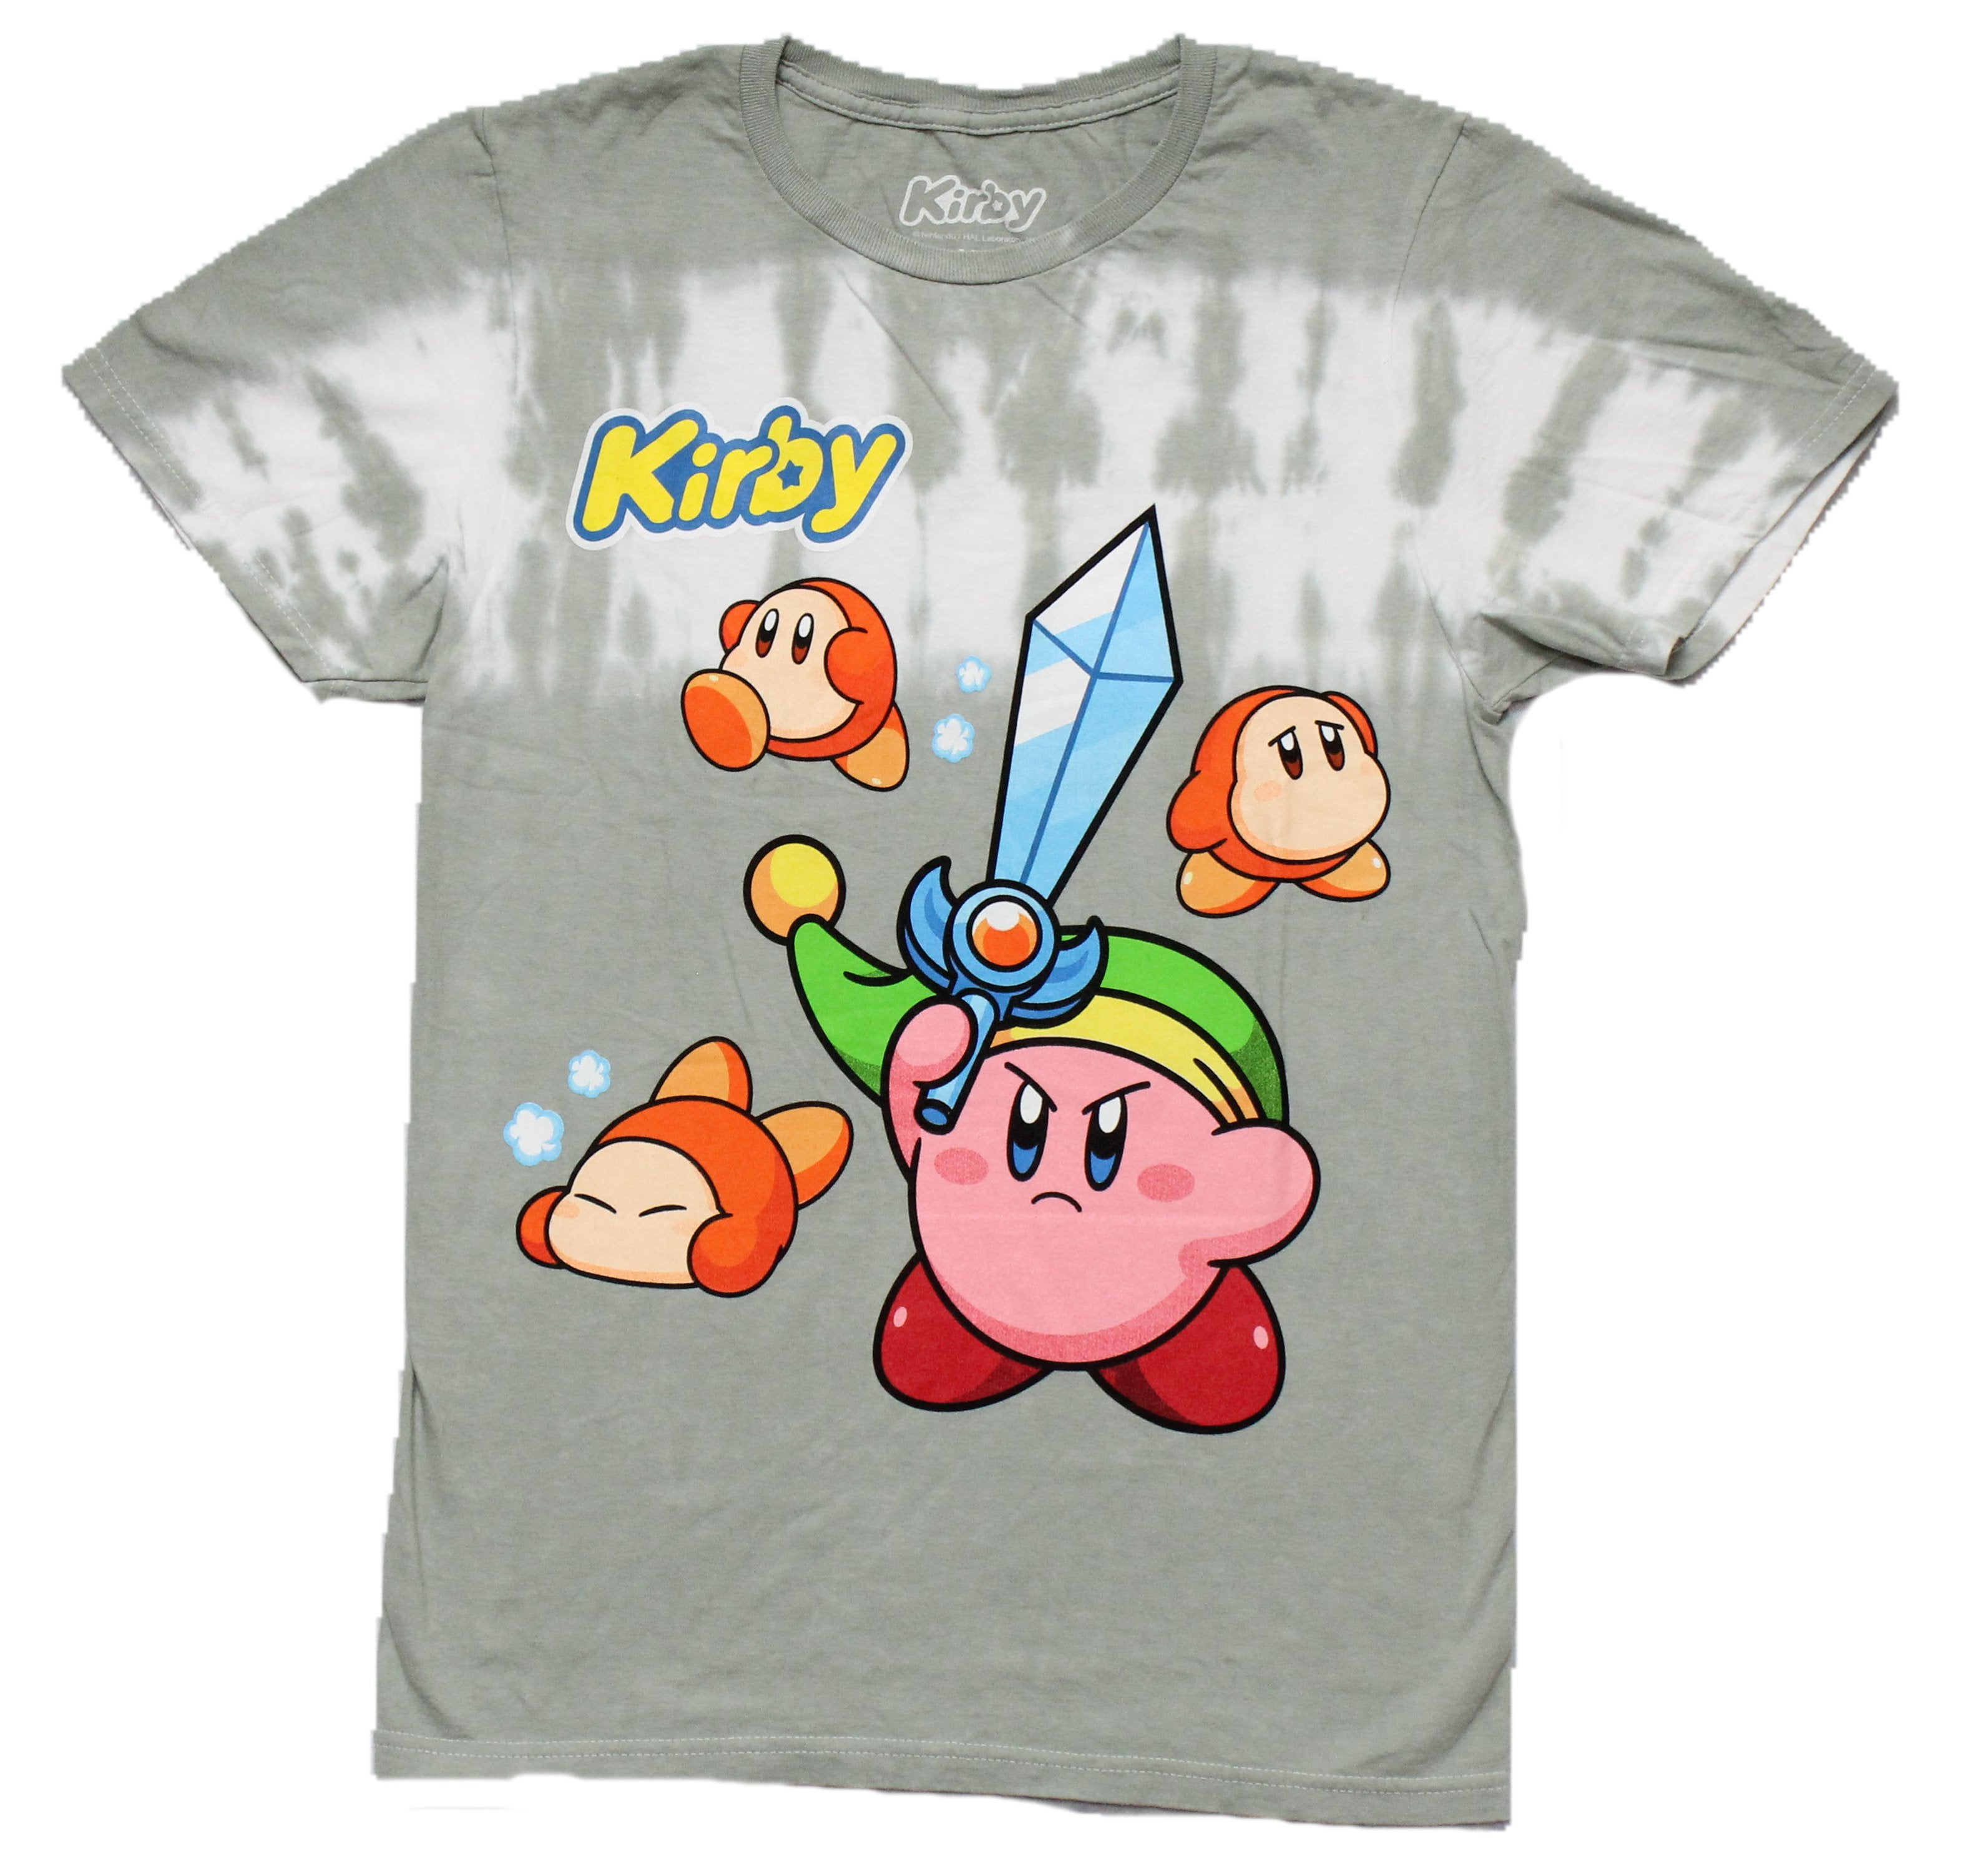 Kirby  Mens T-Shirt - Holding Sword Surrounded by Orange Trio Tie Dye